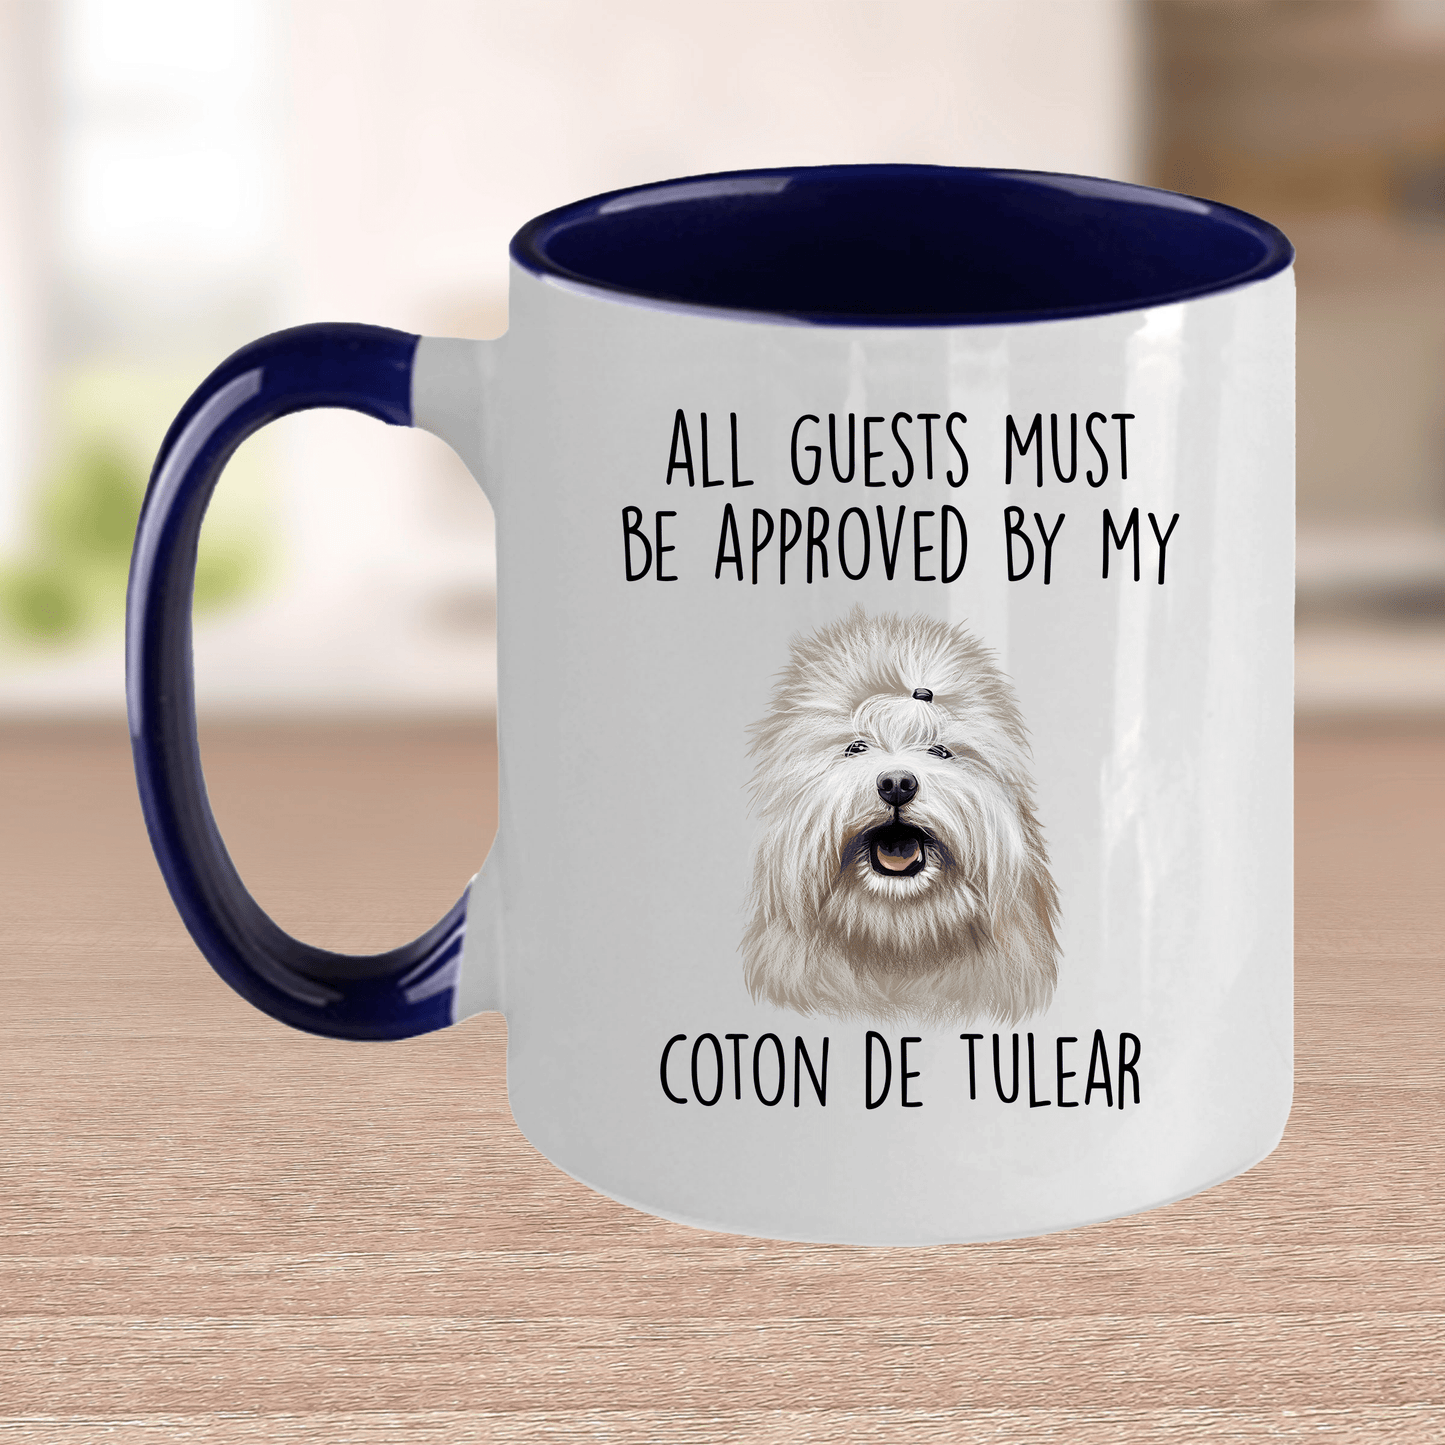 Coton de Tulear Funny Ceramic Coffee Mug All Guests Must Be Approved by my Dog